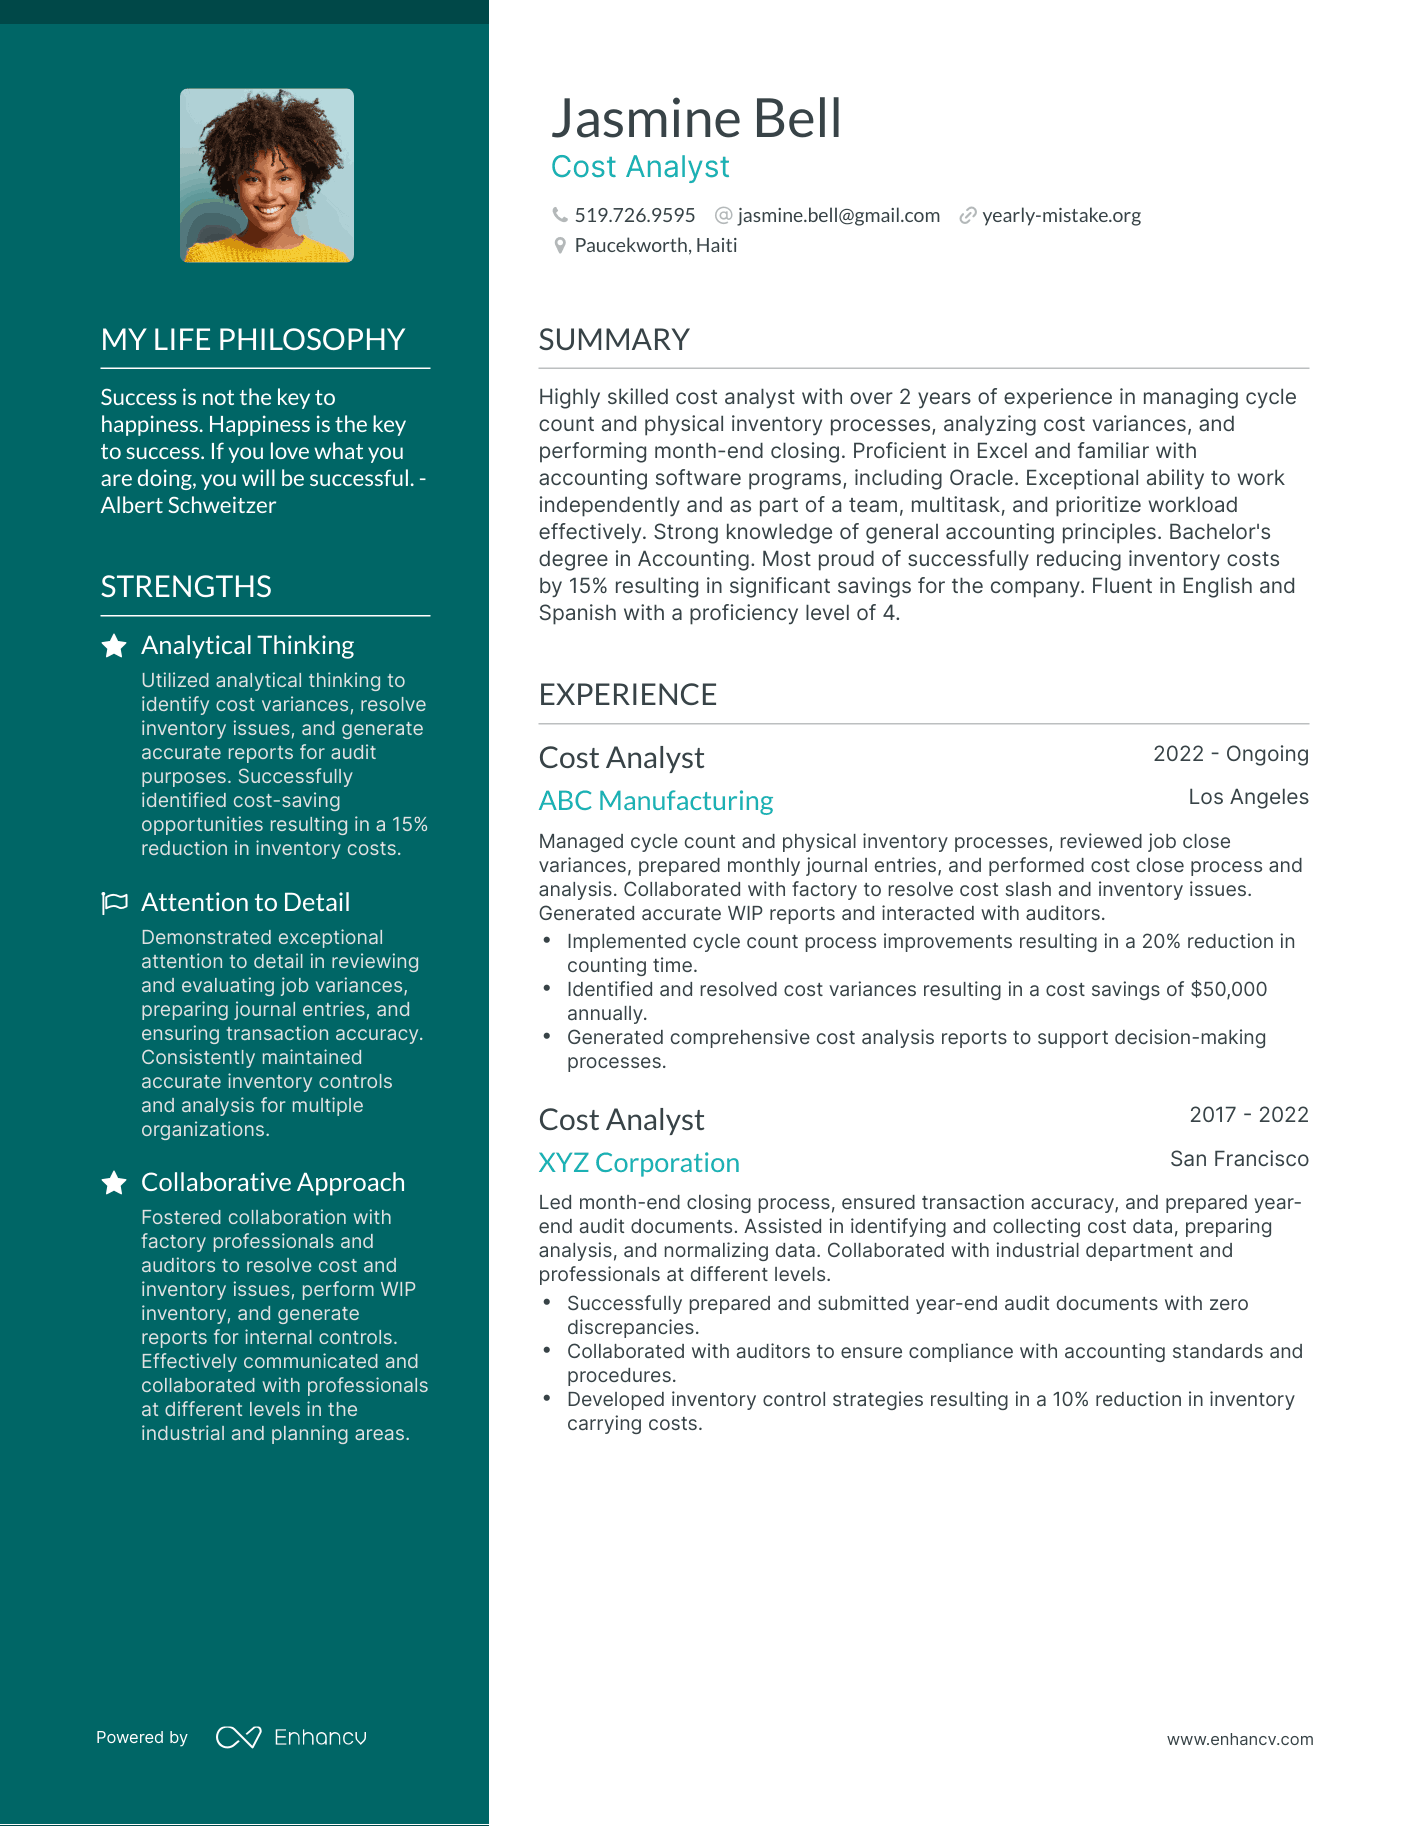 Cost Analyst resume example